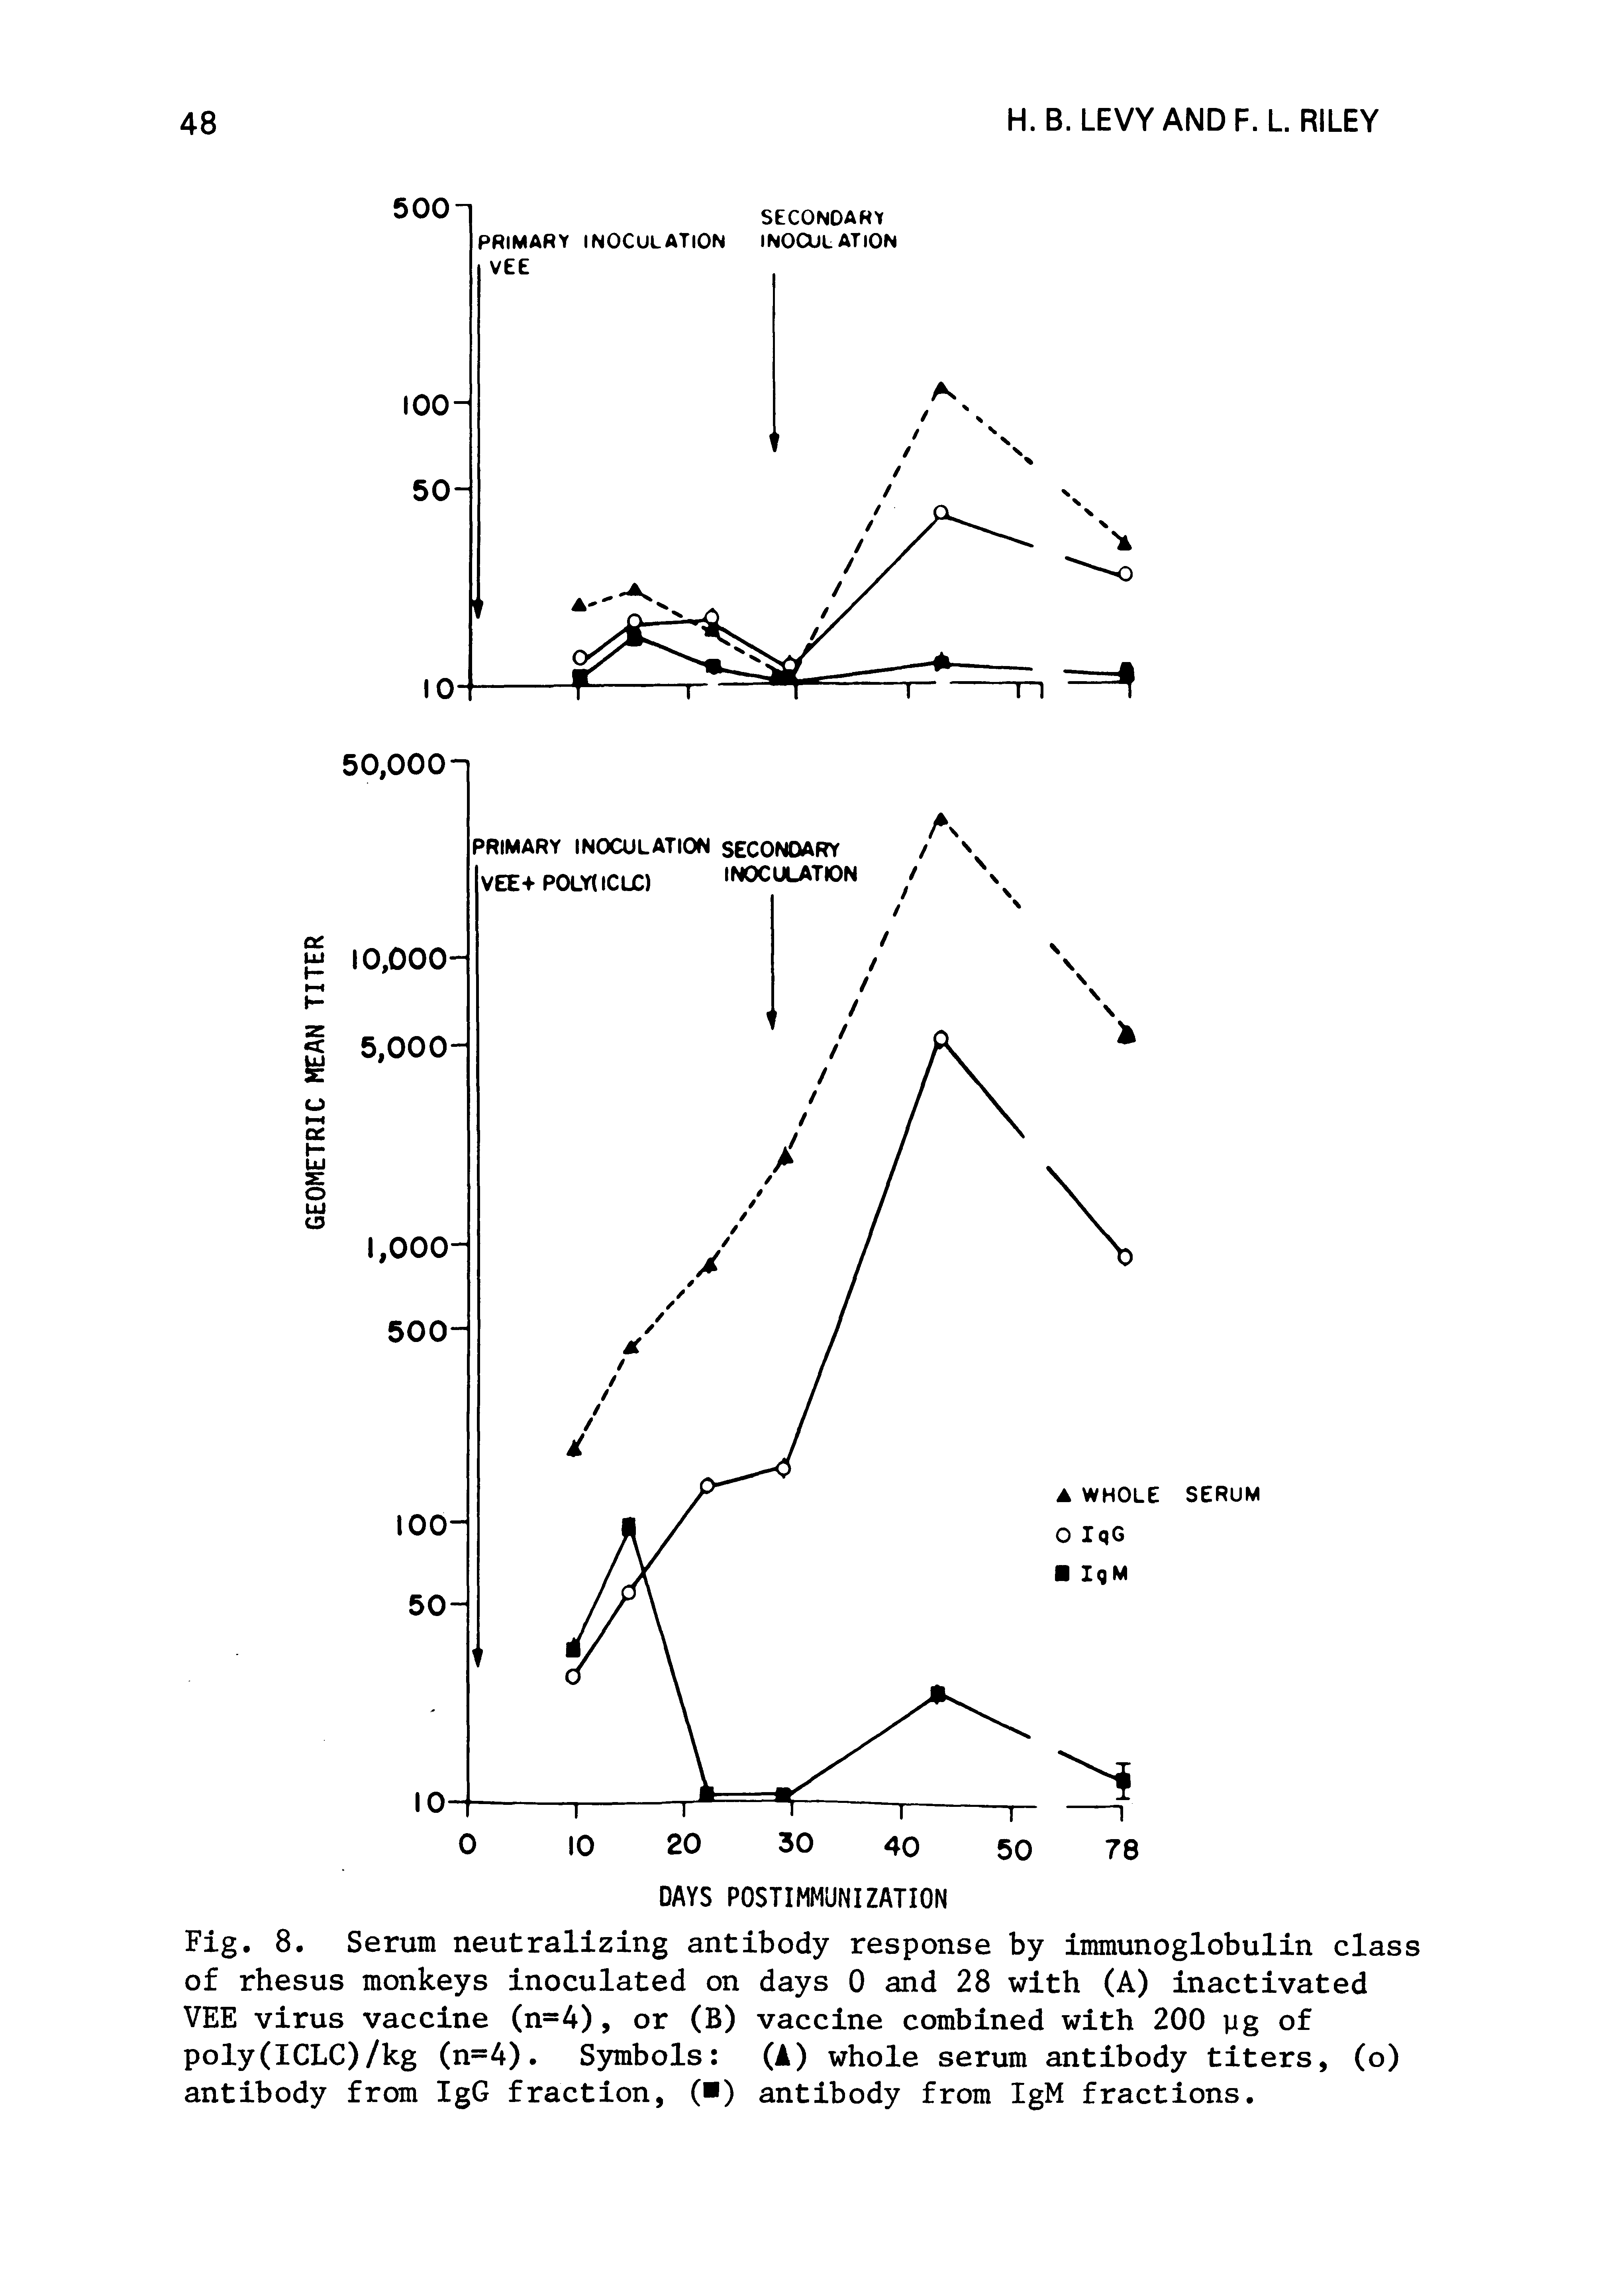 Fig. 8. Serum neutralizing antibody response by immunoglobulin class of rhesus monkeys inoculated on days 0 and 28 with (A) inactivated VEE virus vaccine (n=4), or (B) vaccine combined with 200 yg of poly(ICLC)/kg (n=4). Symbols (A) whole serum antibody titers, (o) antibody from IgG fraction, ( ) antibody from IgM fractions.